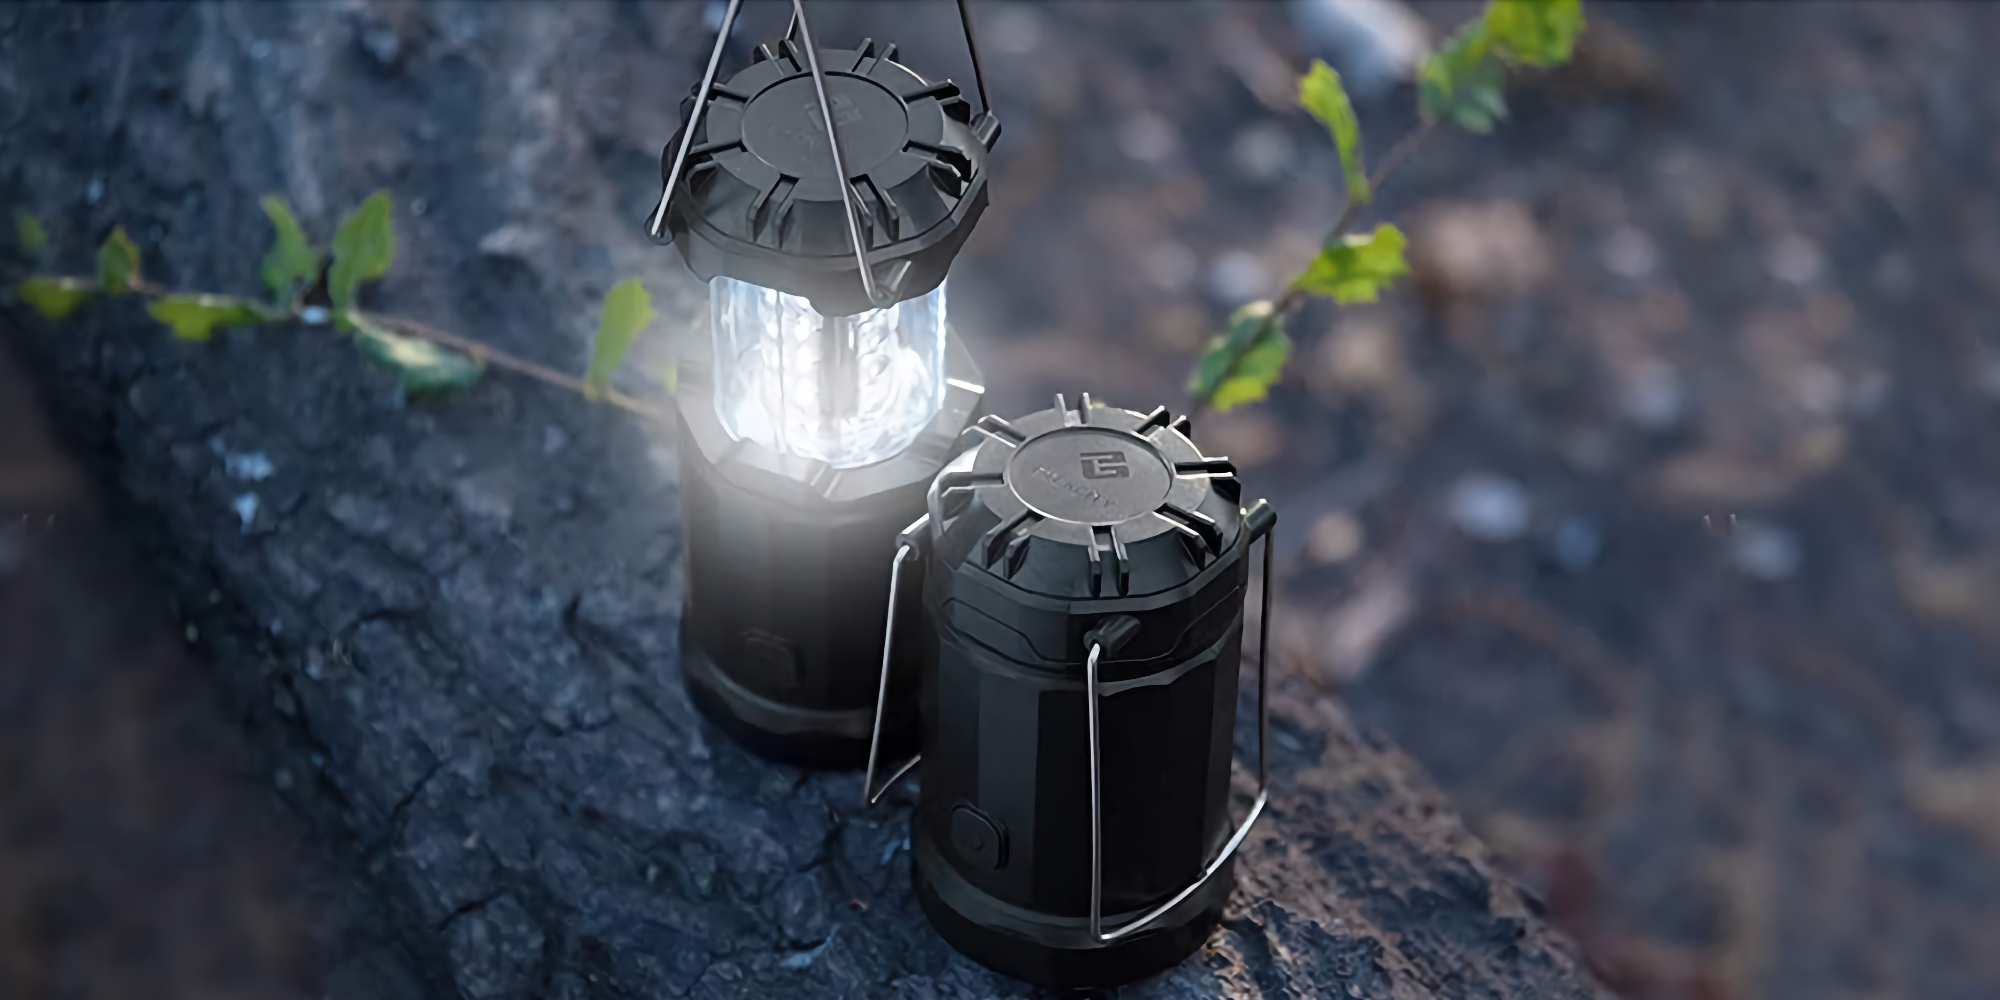 Illuminate your campsite with two magnetic LED lanterns at $7.50